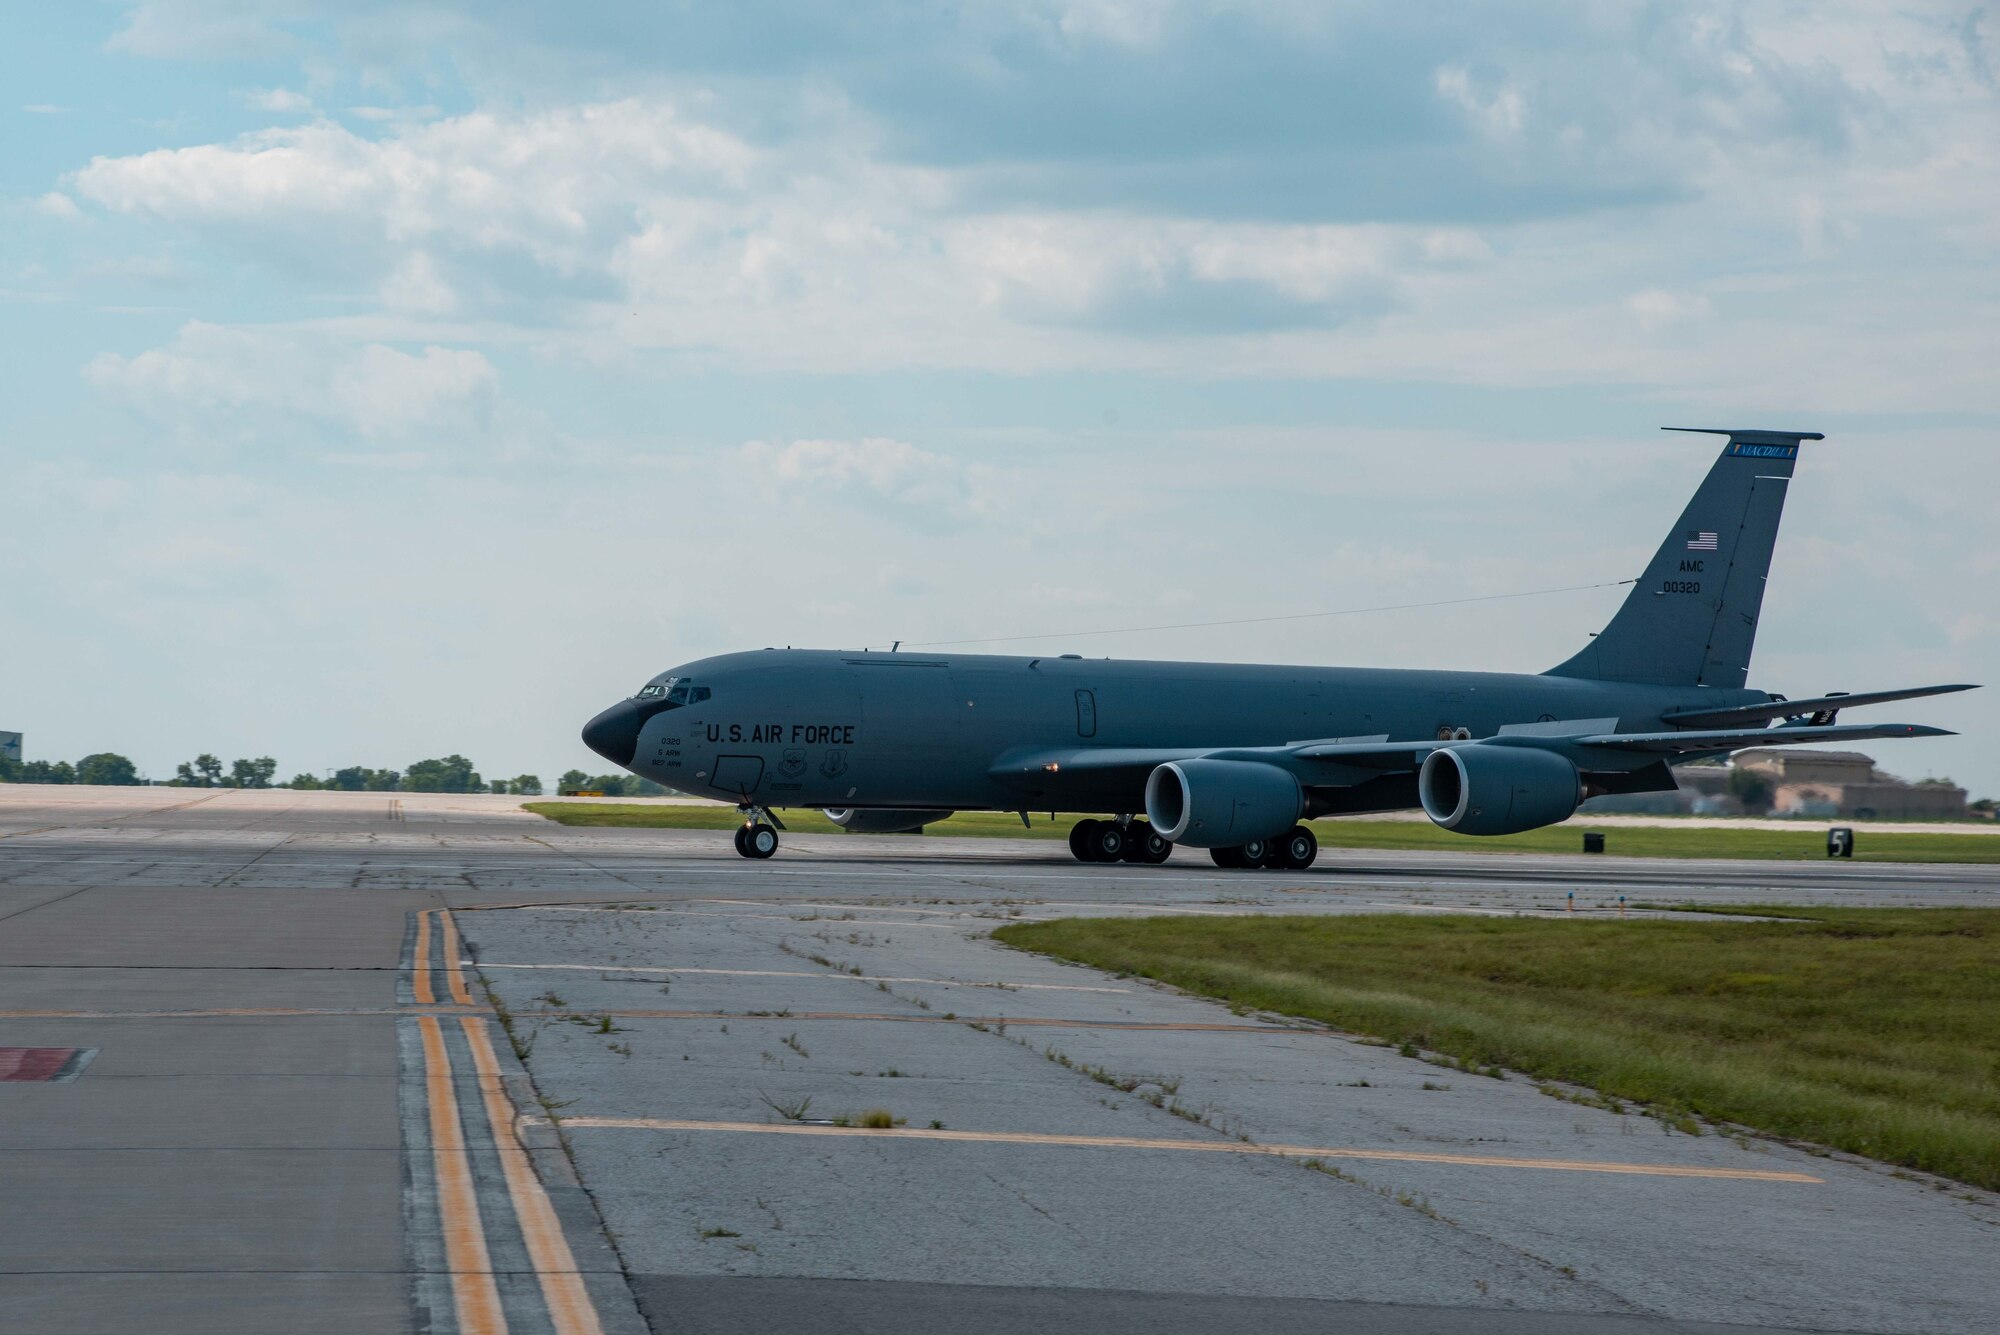 A KC-135 Stratotanker from MacDill Air Force Base, Florida taxi’s the runway July 4, 2021, at McConnell AFB, Kansas. Approximately 10 Aircraft were evacuated to McConnell AFB due to tropical storm Elsa. The aircraft will return to MacDill AFB when conditions return to normal. (U.S. Air Force photo by Airman 1st Class Zachary Willis)